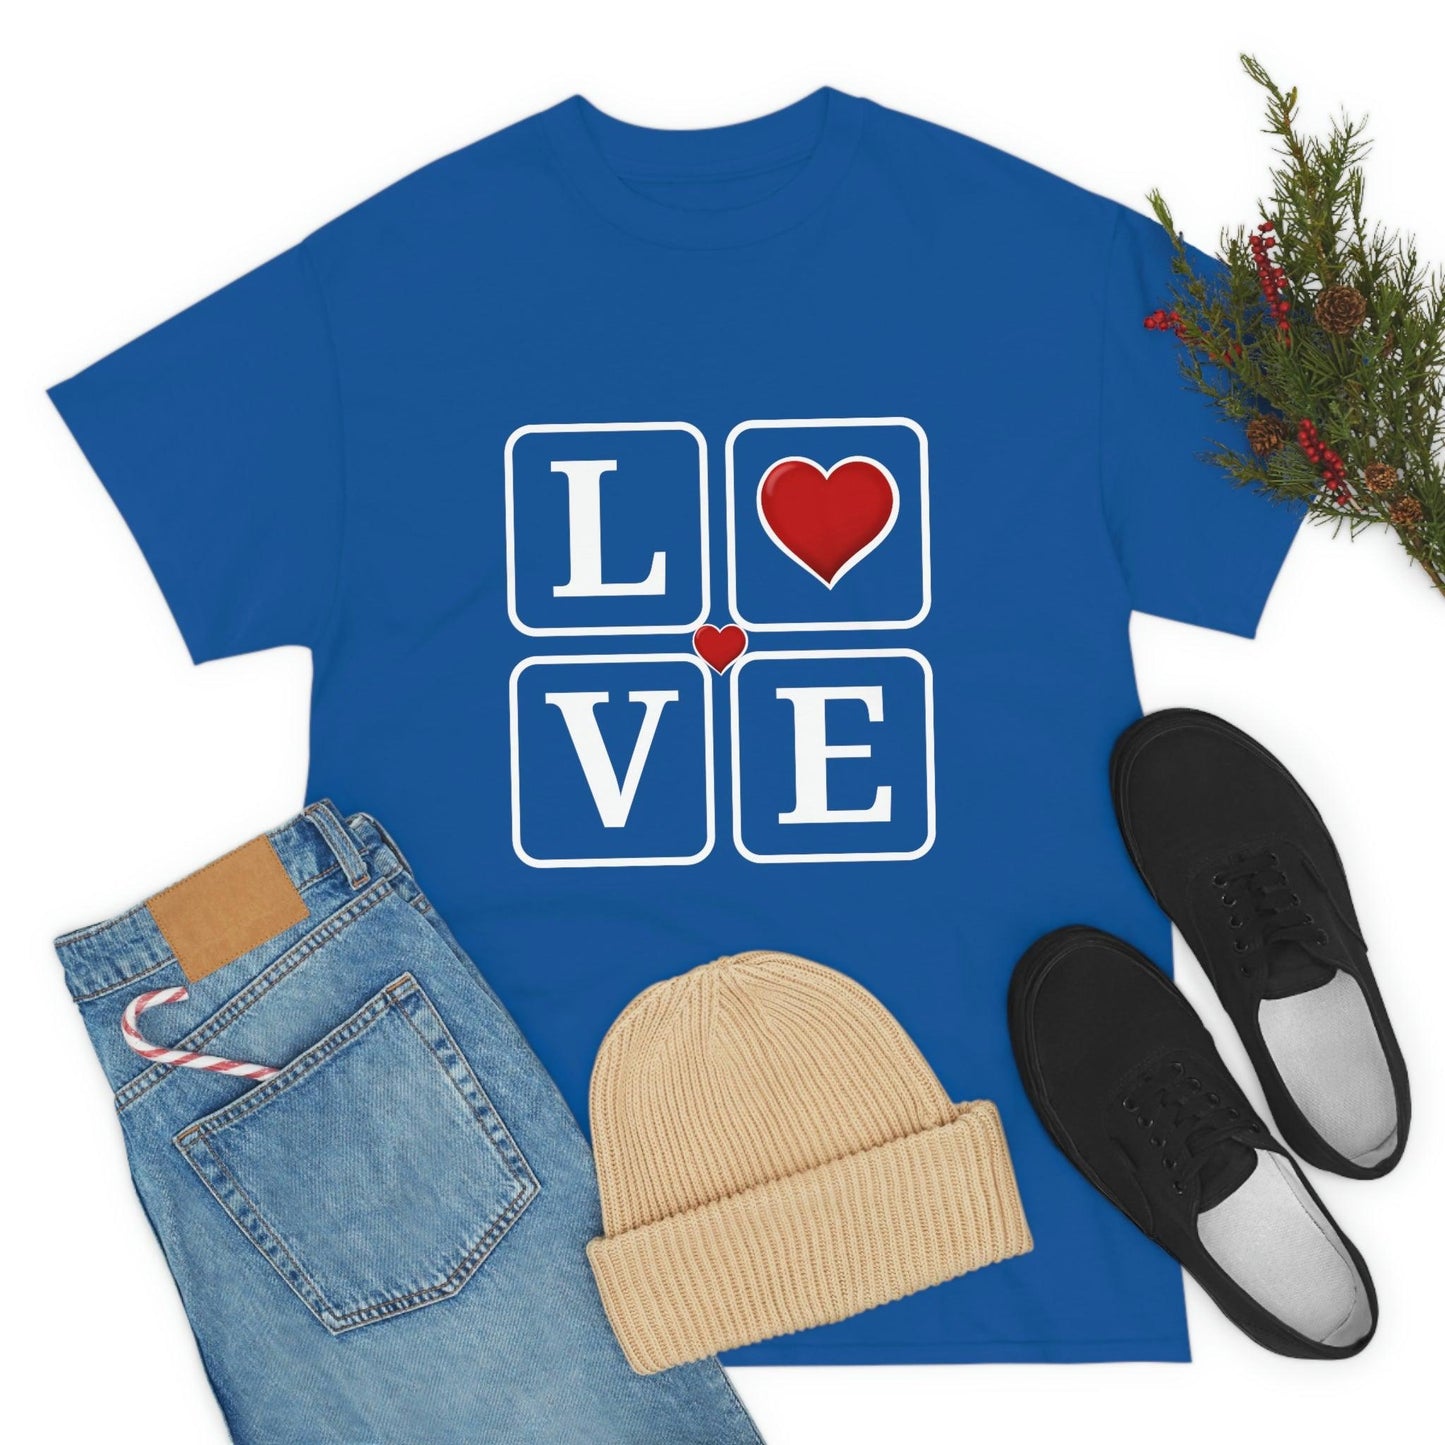 Love square Hearts Shirt, Great Gift for Valentine's day, birthday, engagement, anniversary and many more - Giftsmojo